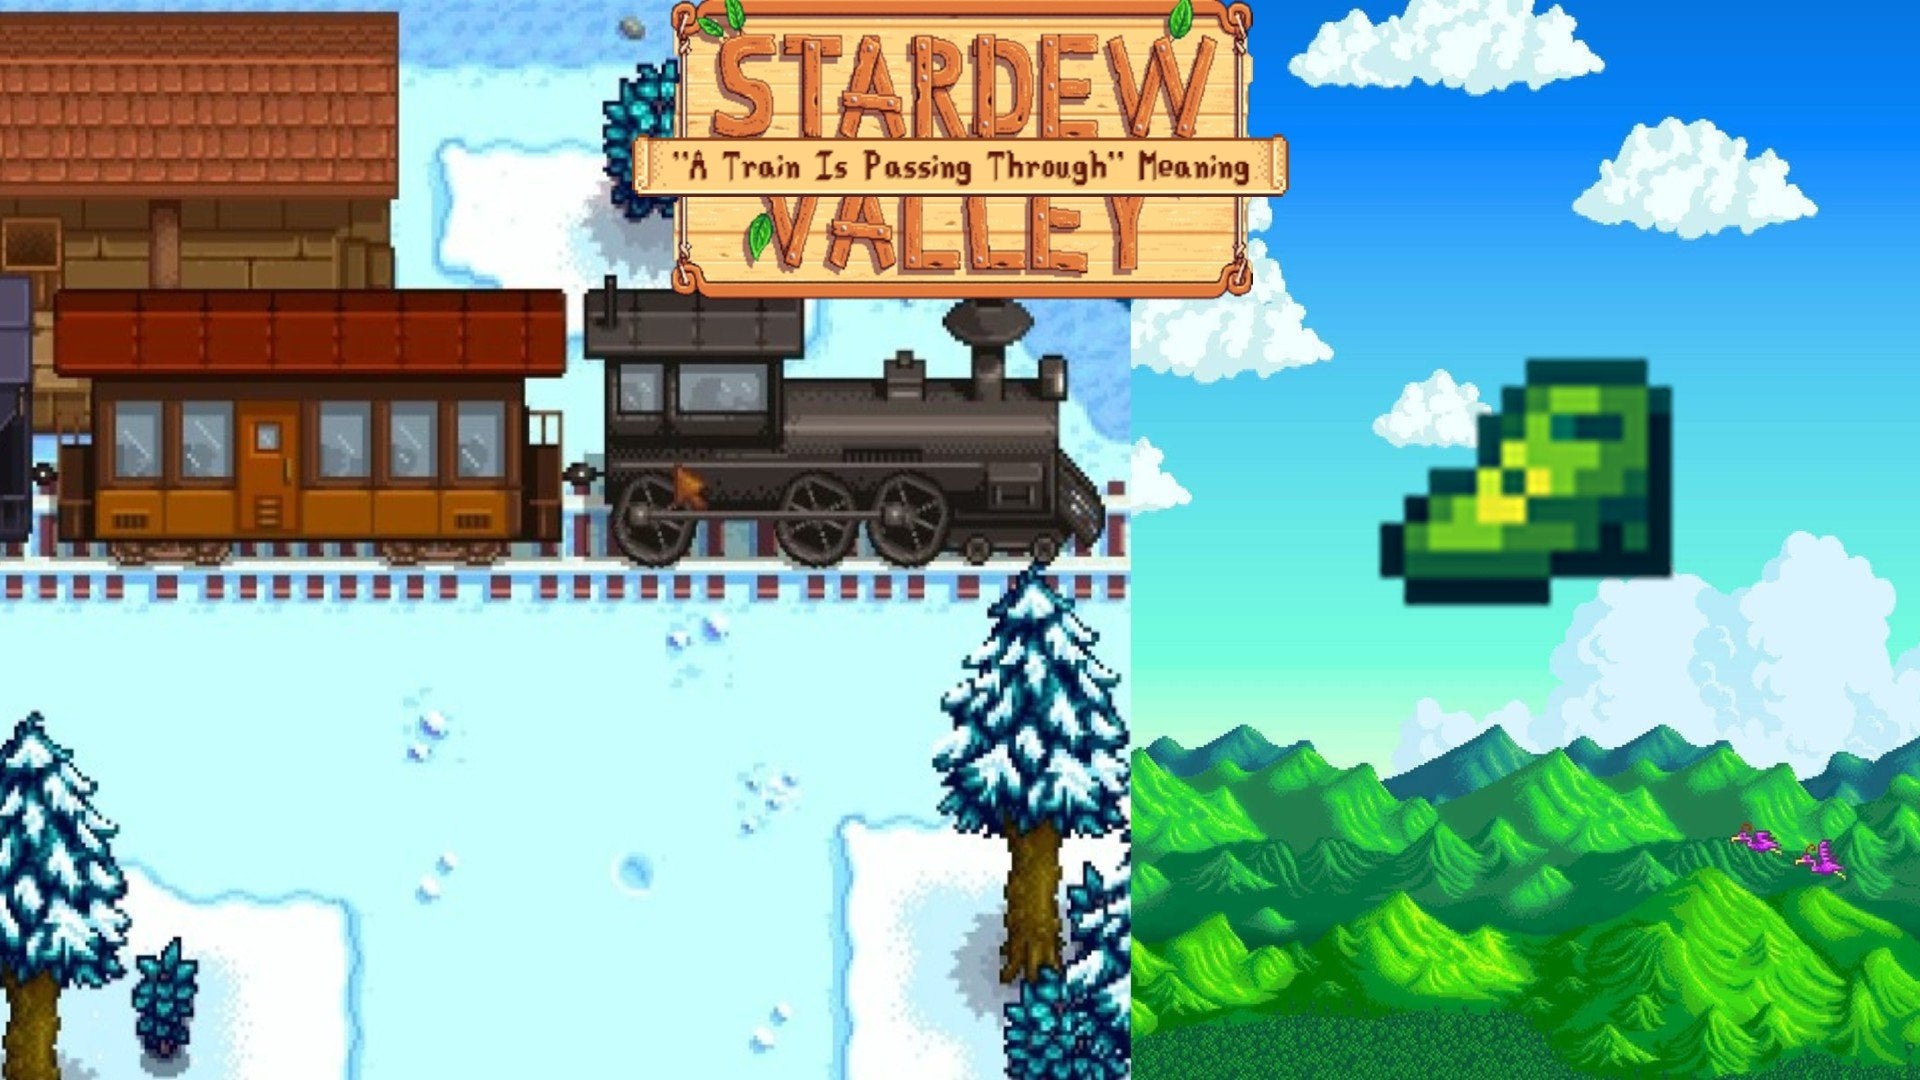 A train passing through Stardew Valley on the left and there's Leprechaun Boots on the right.